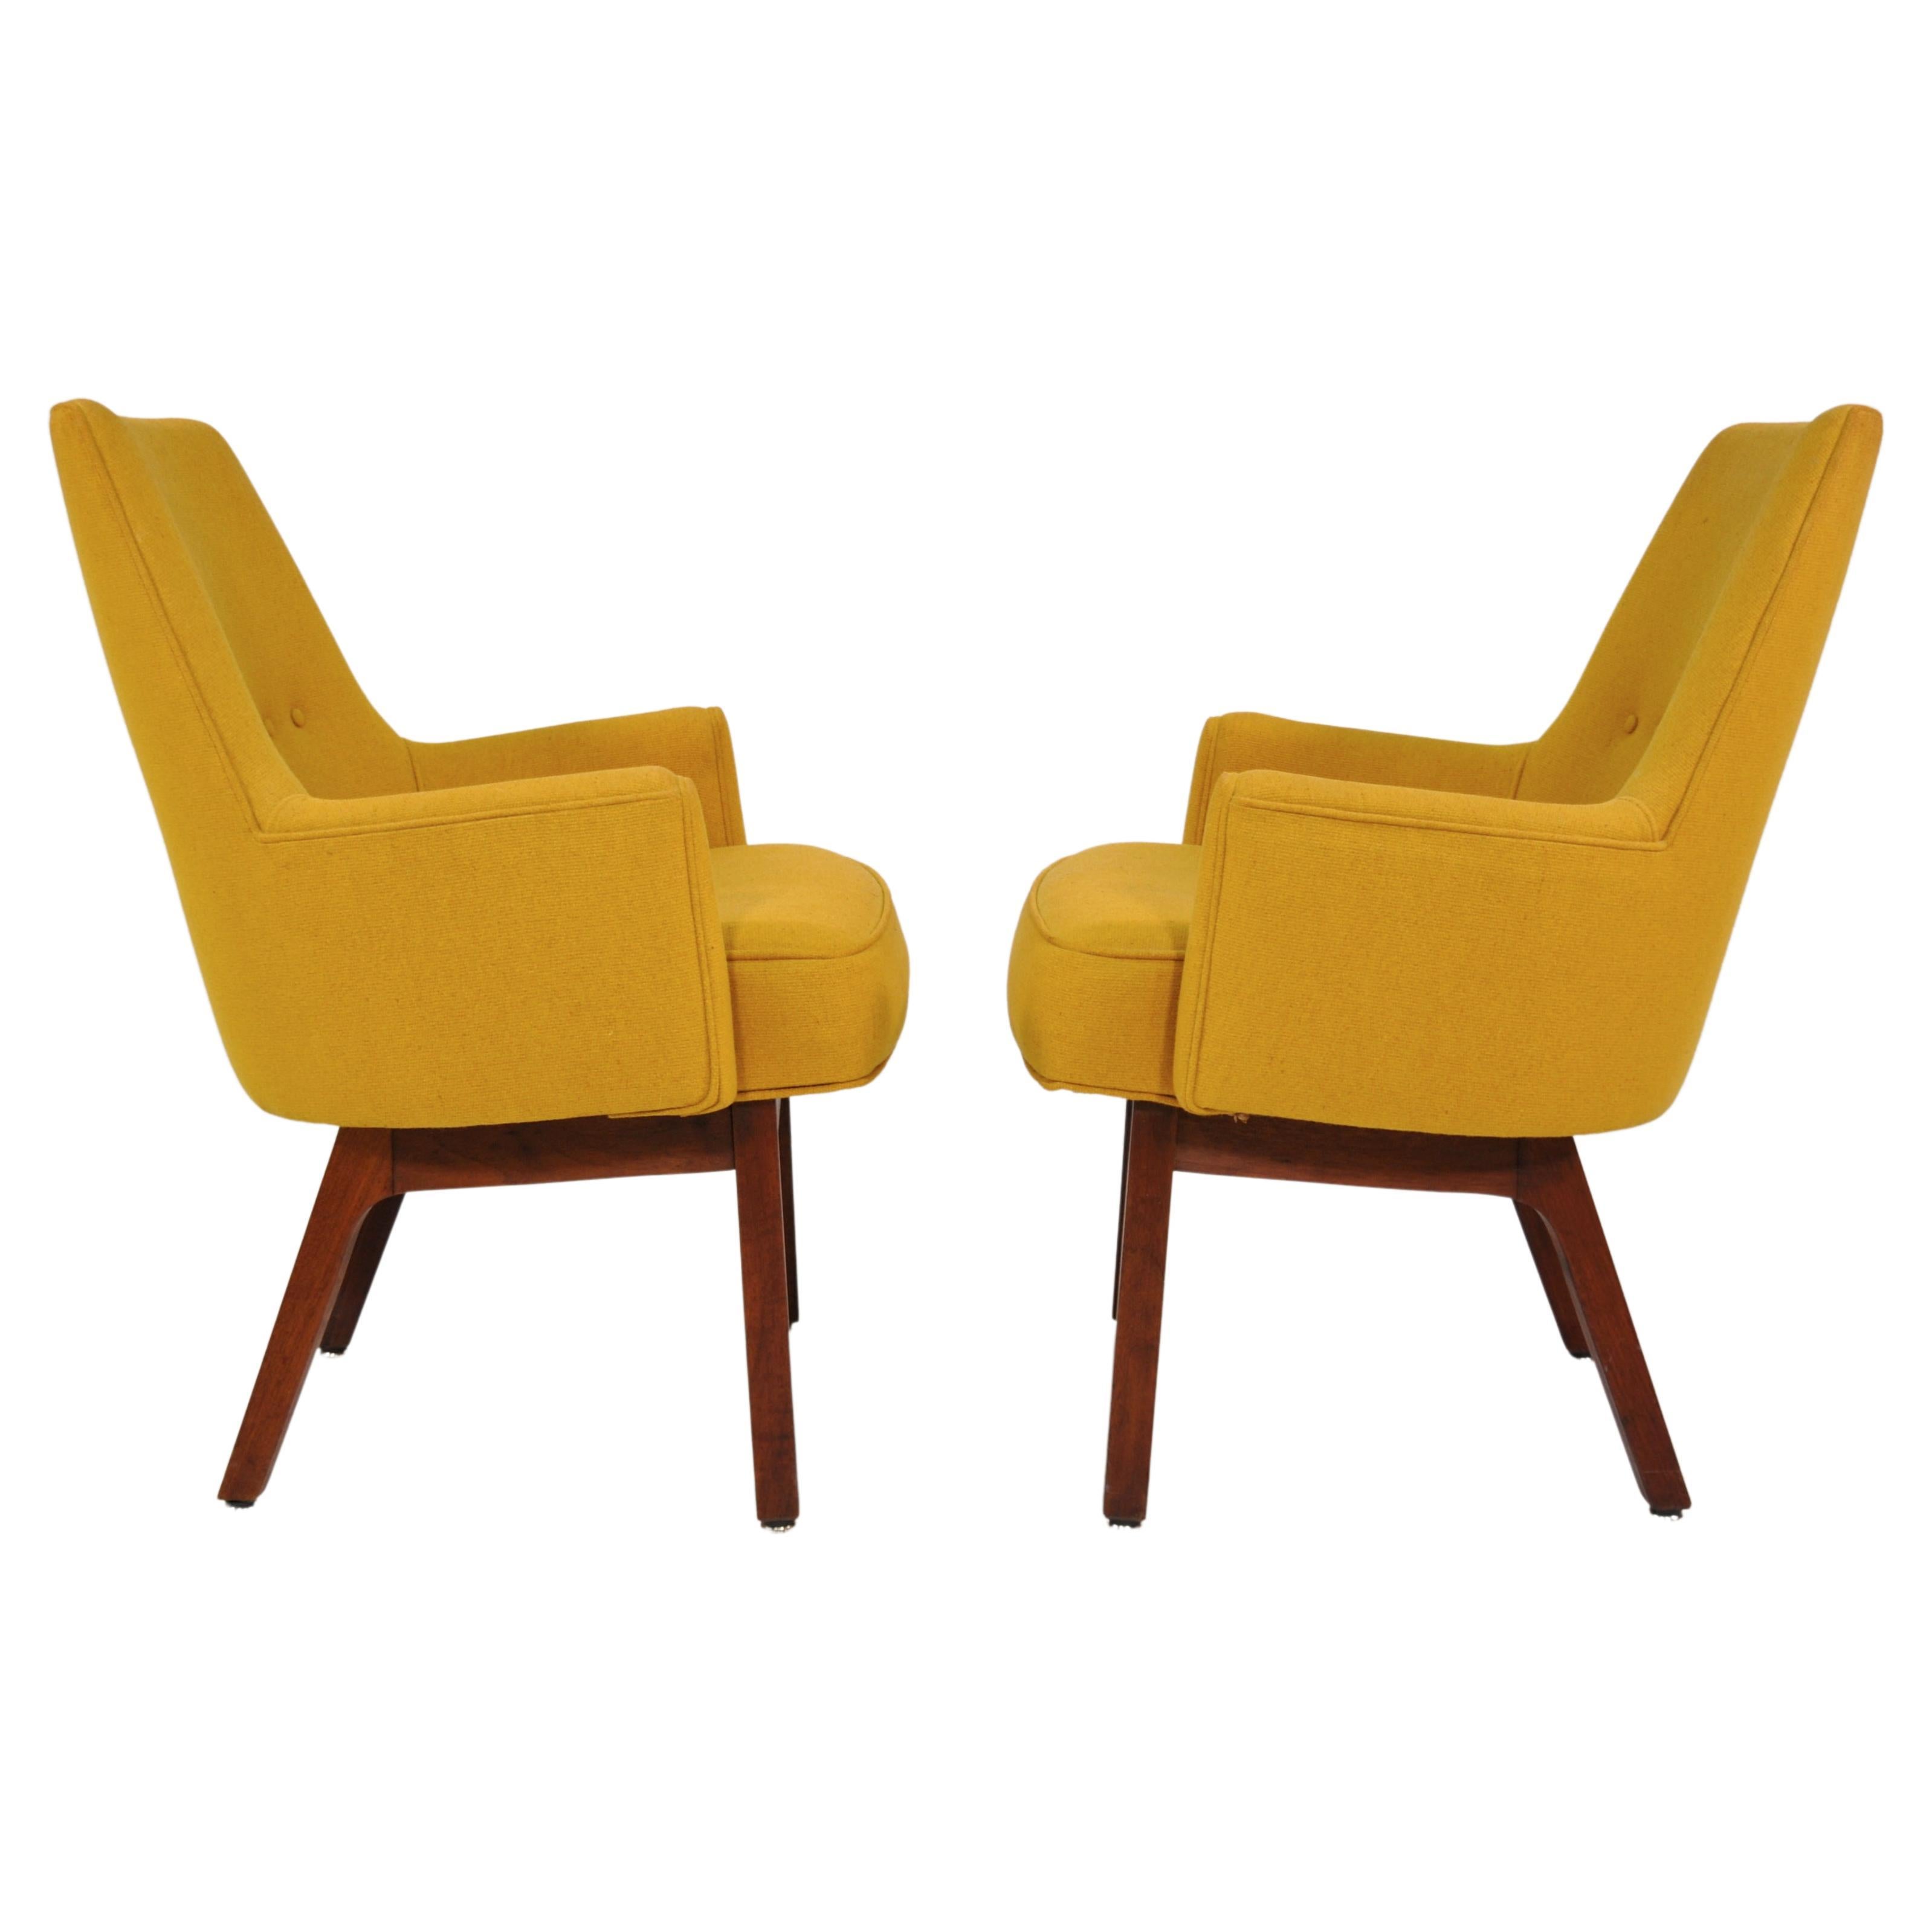 Rare pair of vintage walnut tufted armchairs by Vista of California in all original condition. The Mid-Century Modern lounge chairs feature: original warm yellow wool upholstery; bucket style seats; tapered backrest with button tufting; label. These